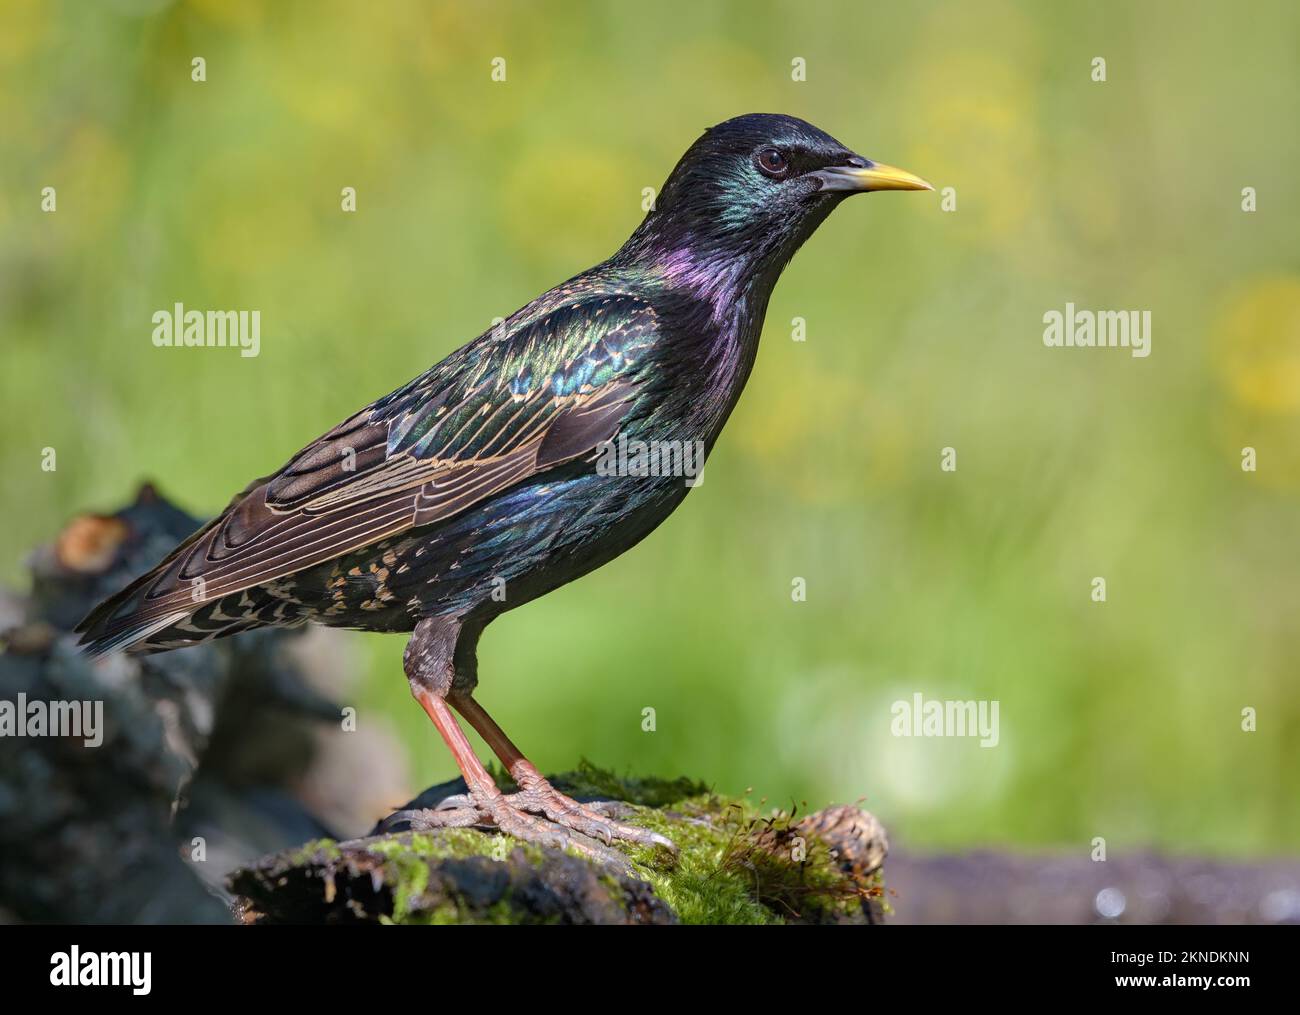 Snining male Common starling (Sturnus vulgaris) looking curiously and posing on mossy stump Stock Photo